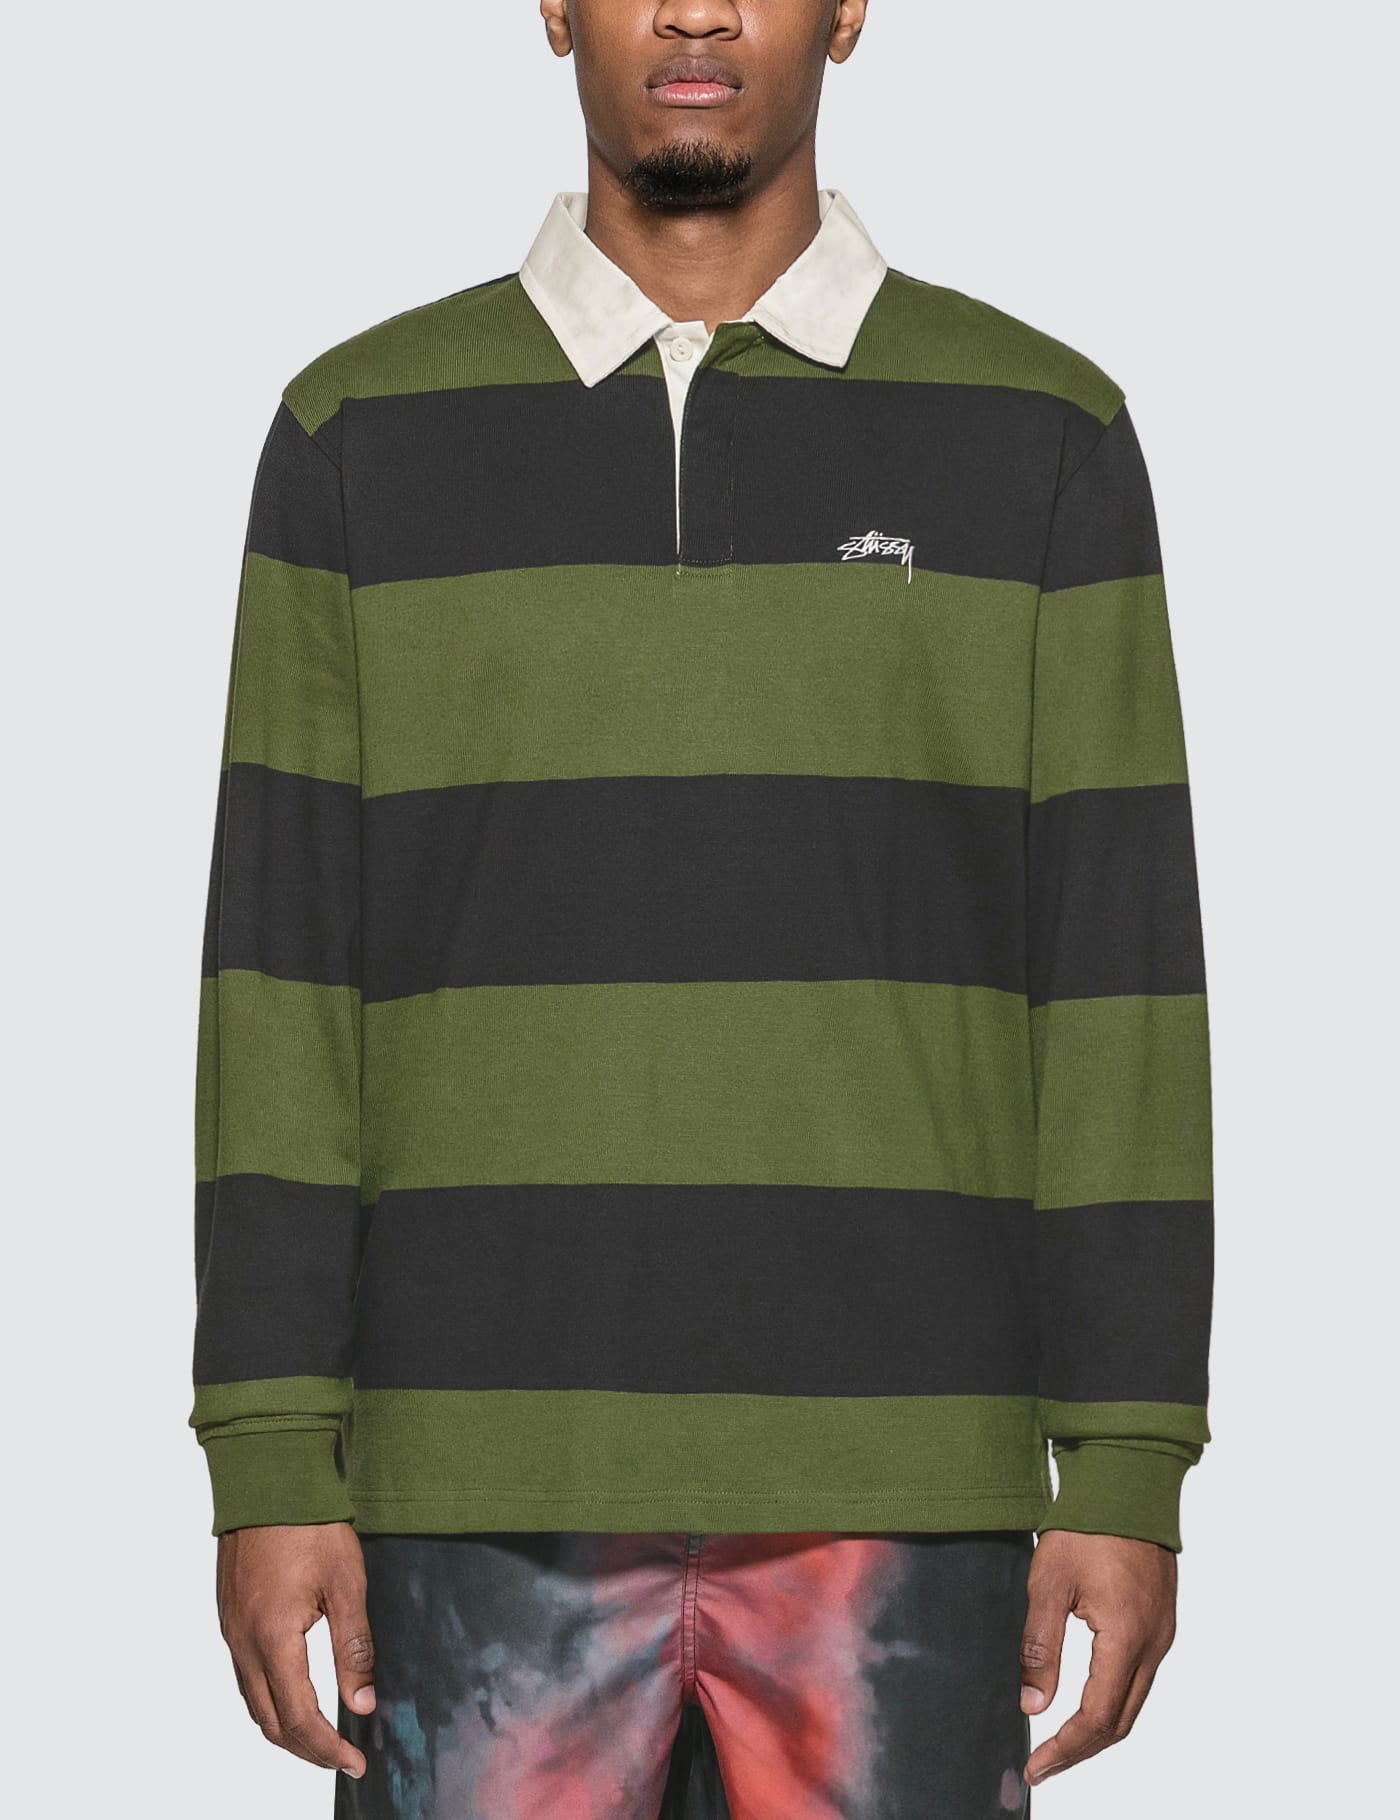 Stüssy - Classic Stripe Rugby Shirt | HBX - Globally Curated 